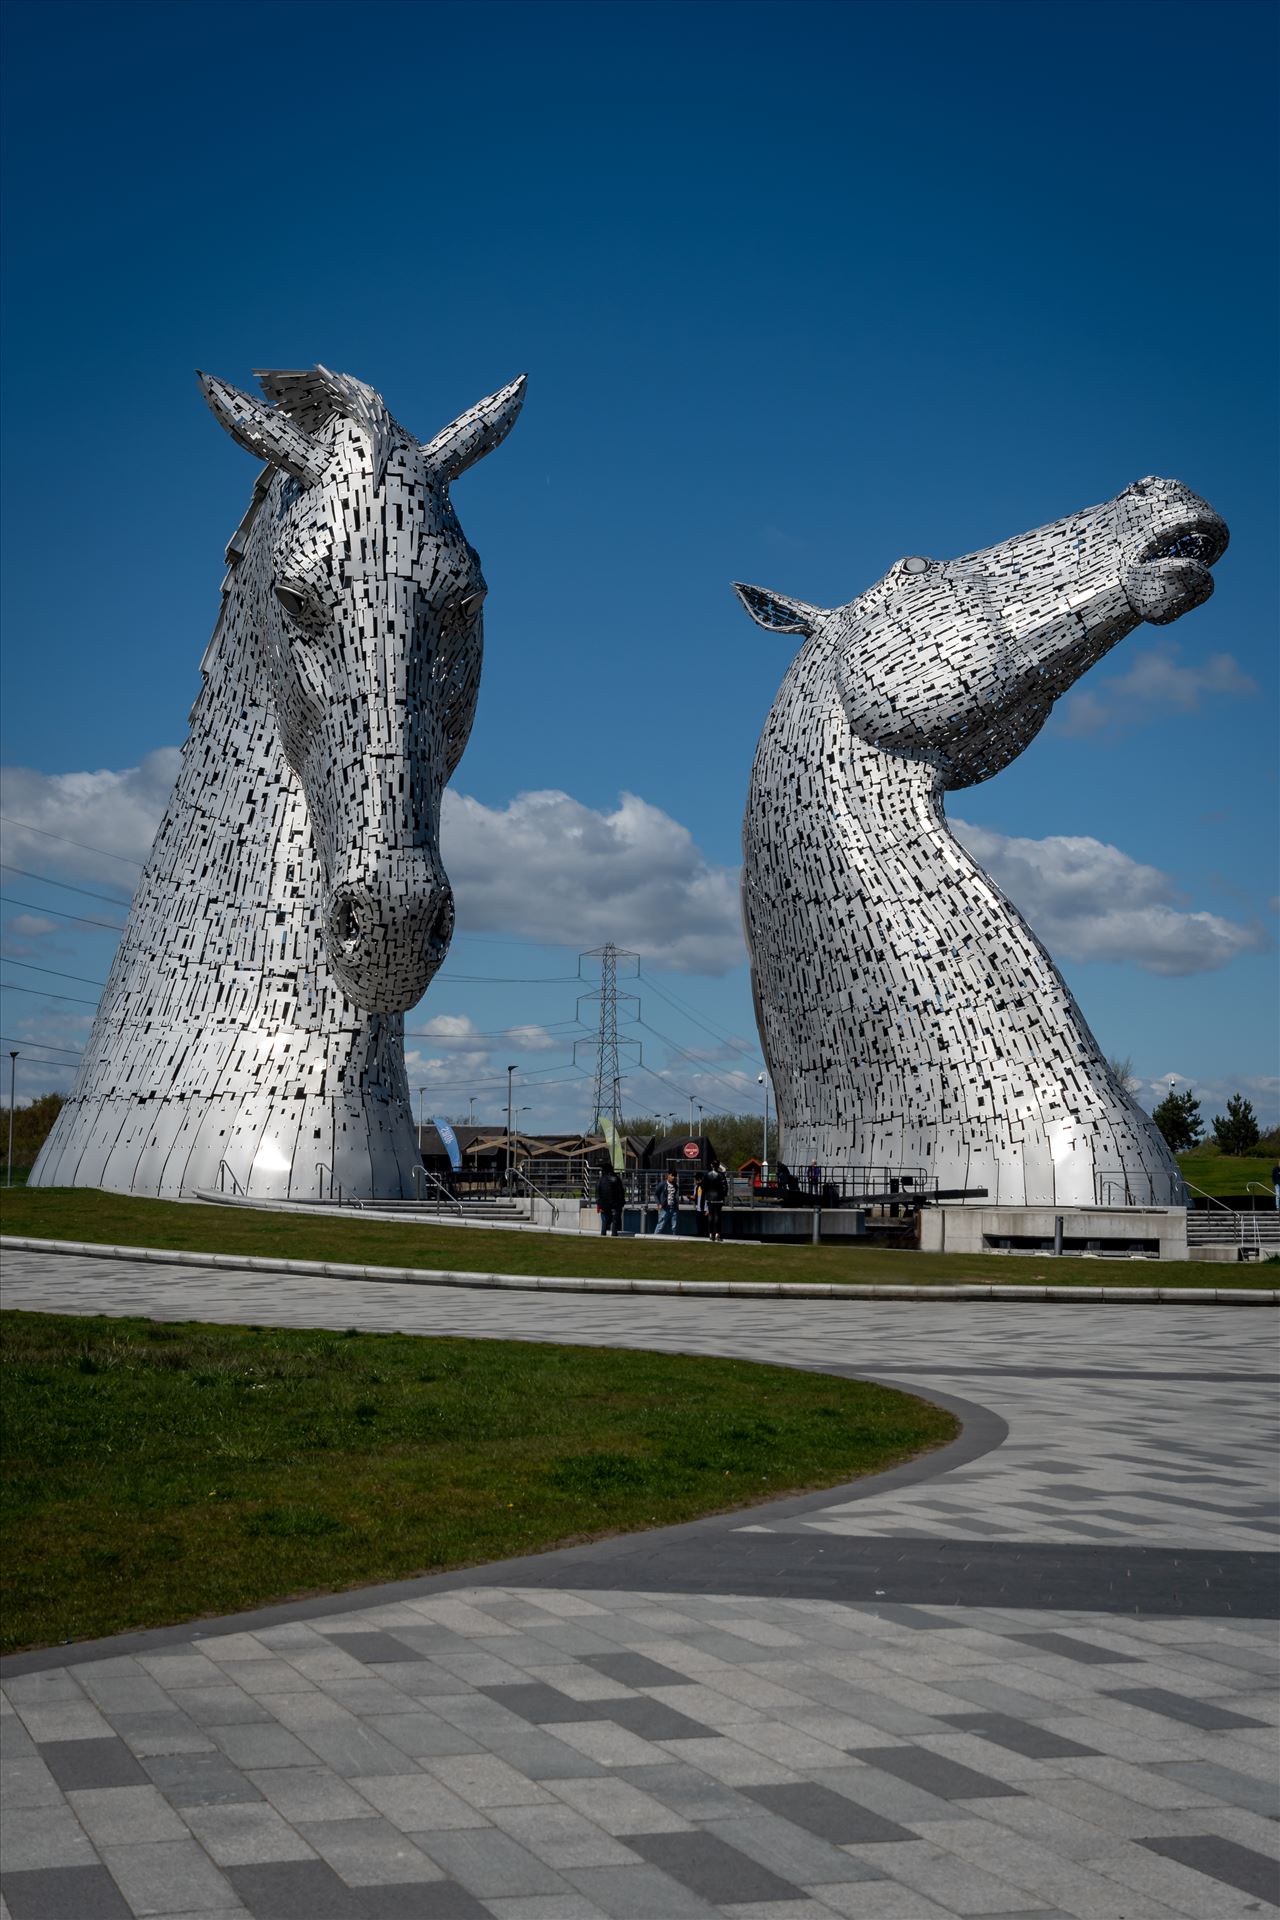 \'The Kelpies\', Falkirk, Scotland - Built of structural steel with a stainless steel cladding, The Kelpies are 30 metres high and weigh 300 tonnes each. Construction began in June 2013, and was complete by October 2013. by Graham Dobson Photography